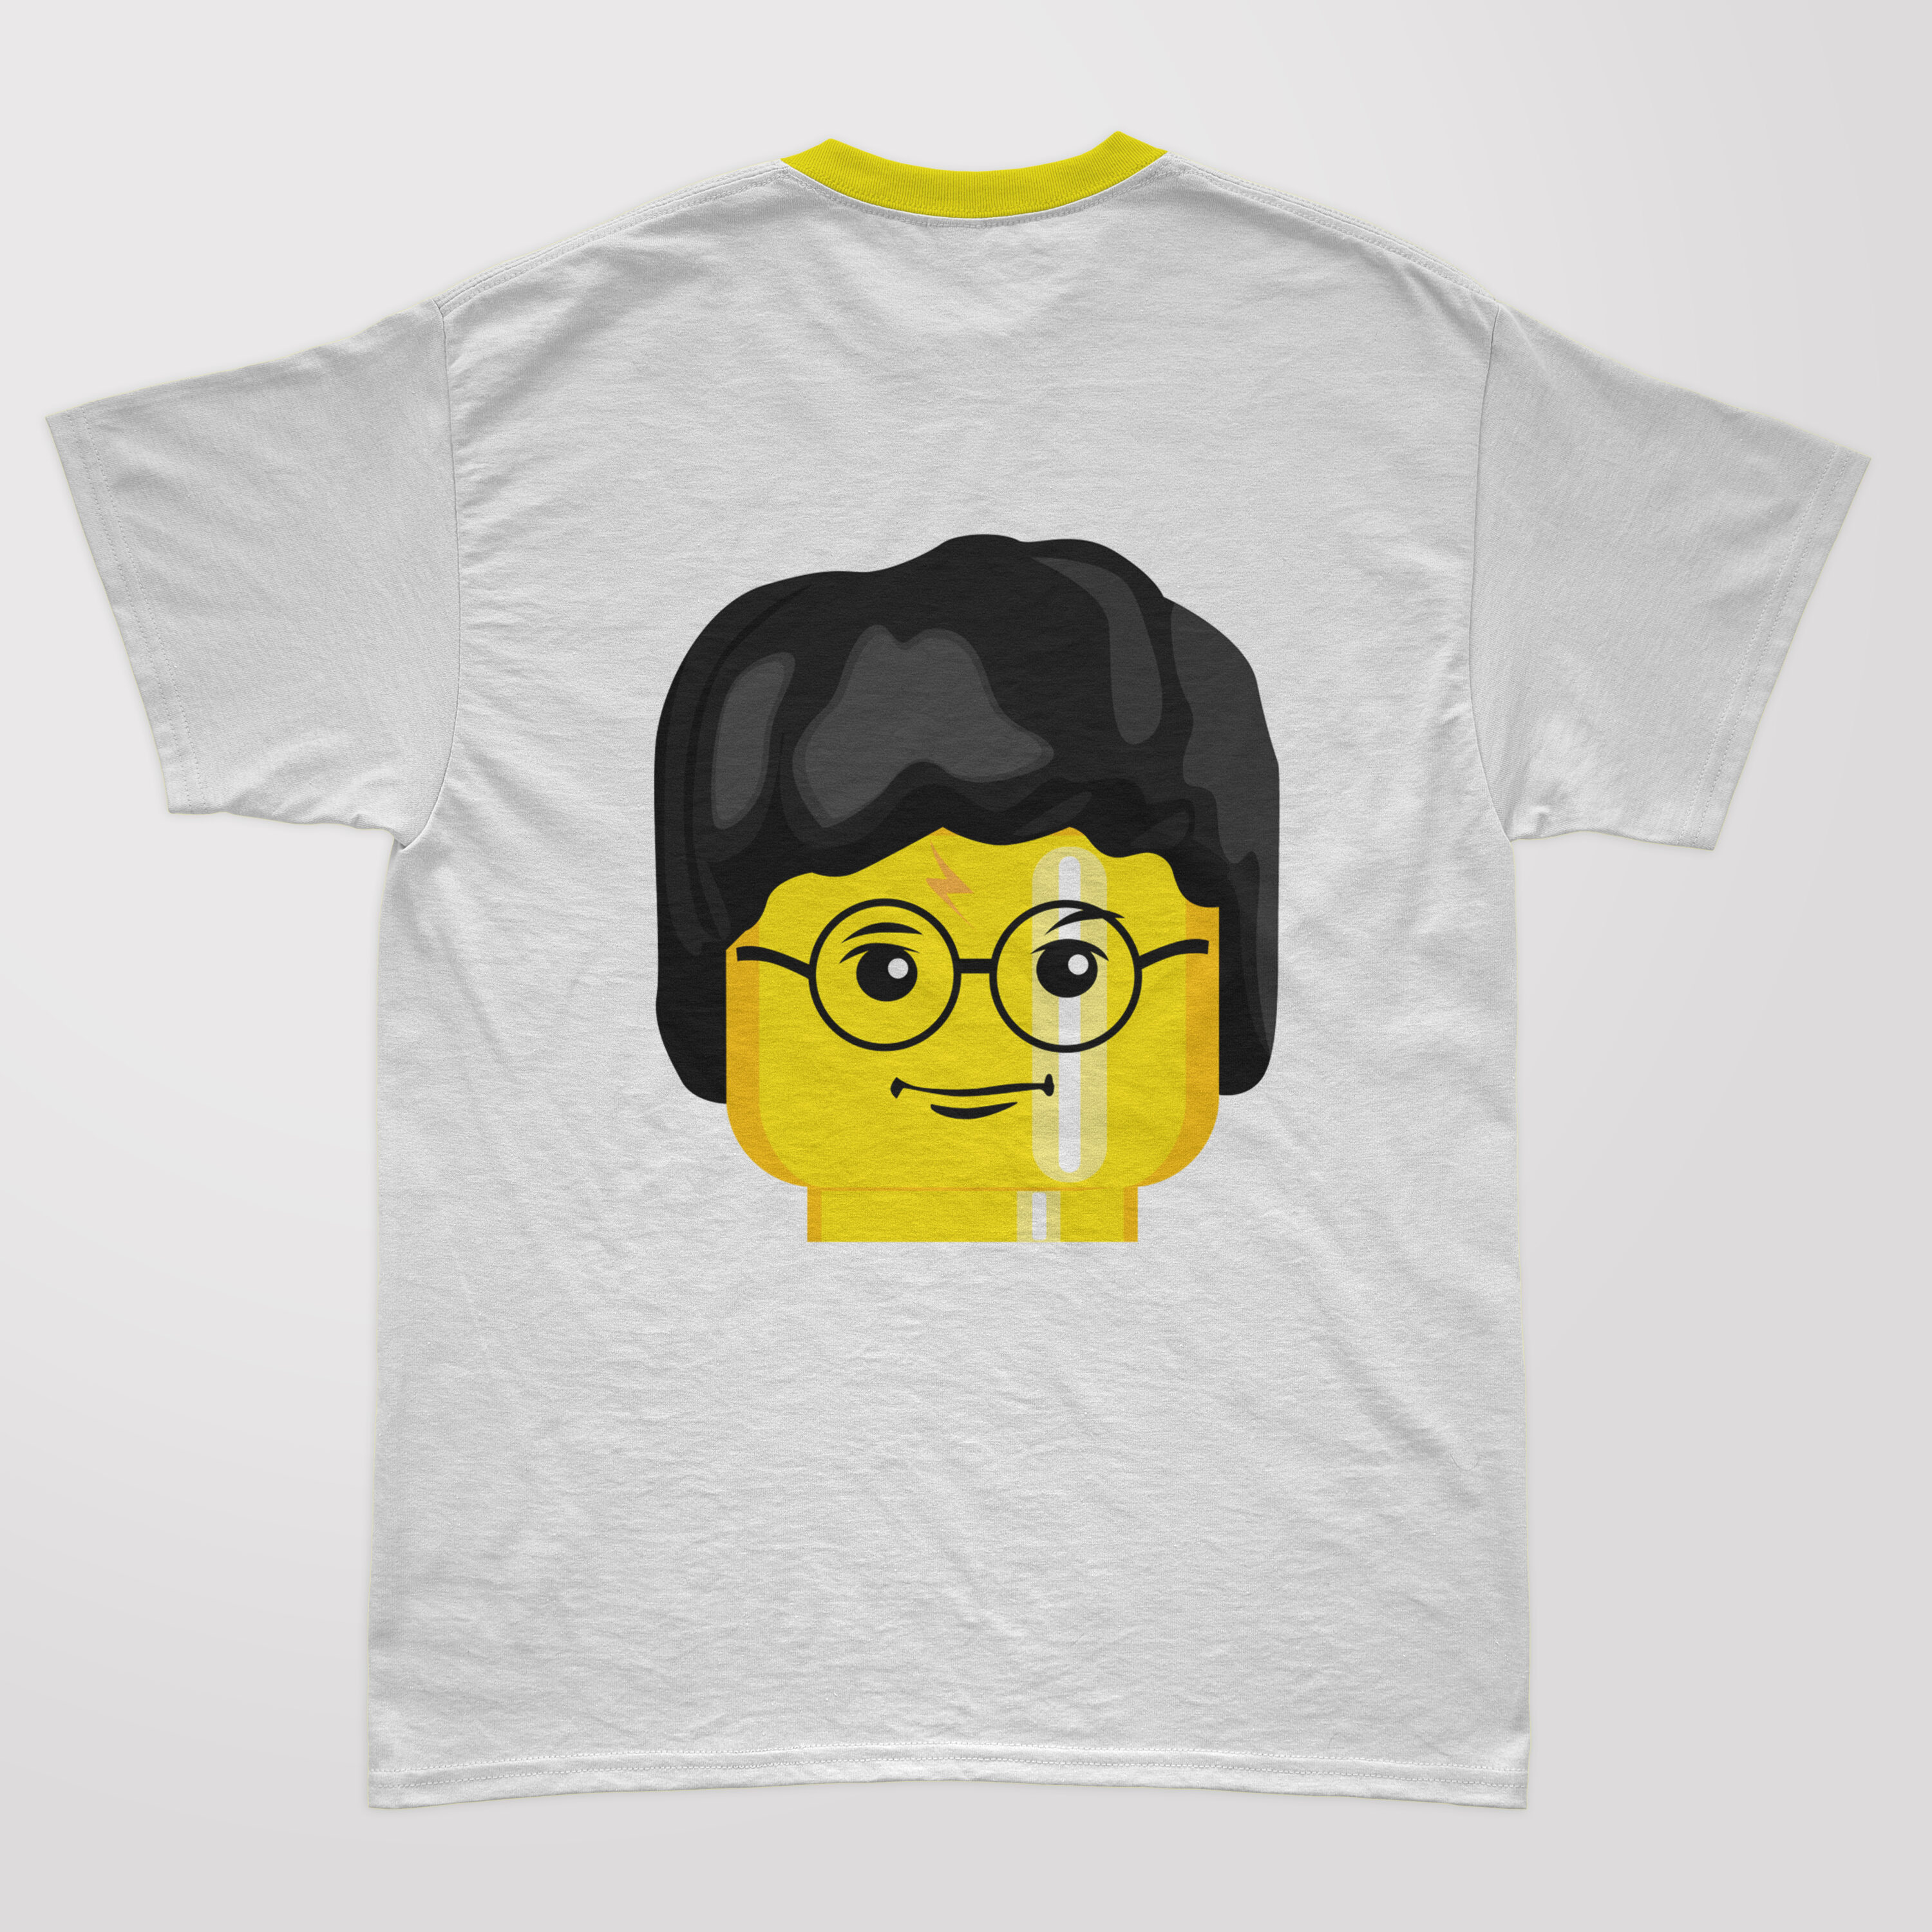 Lego character in white t-shirt and yellow collar.